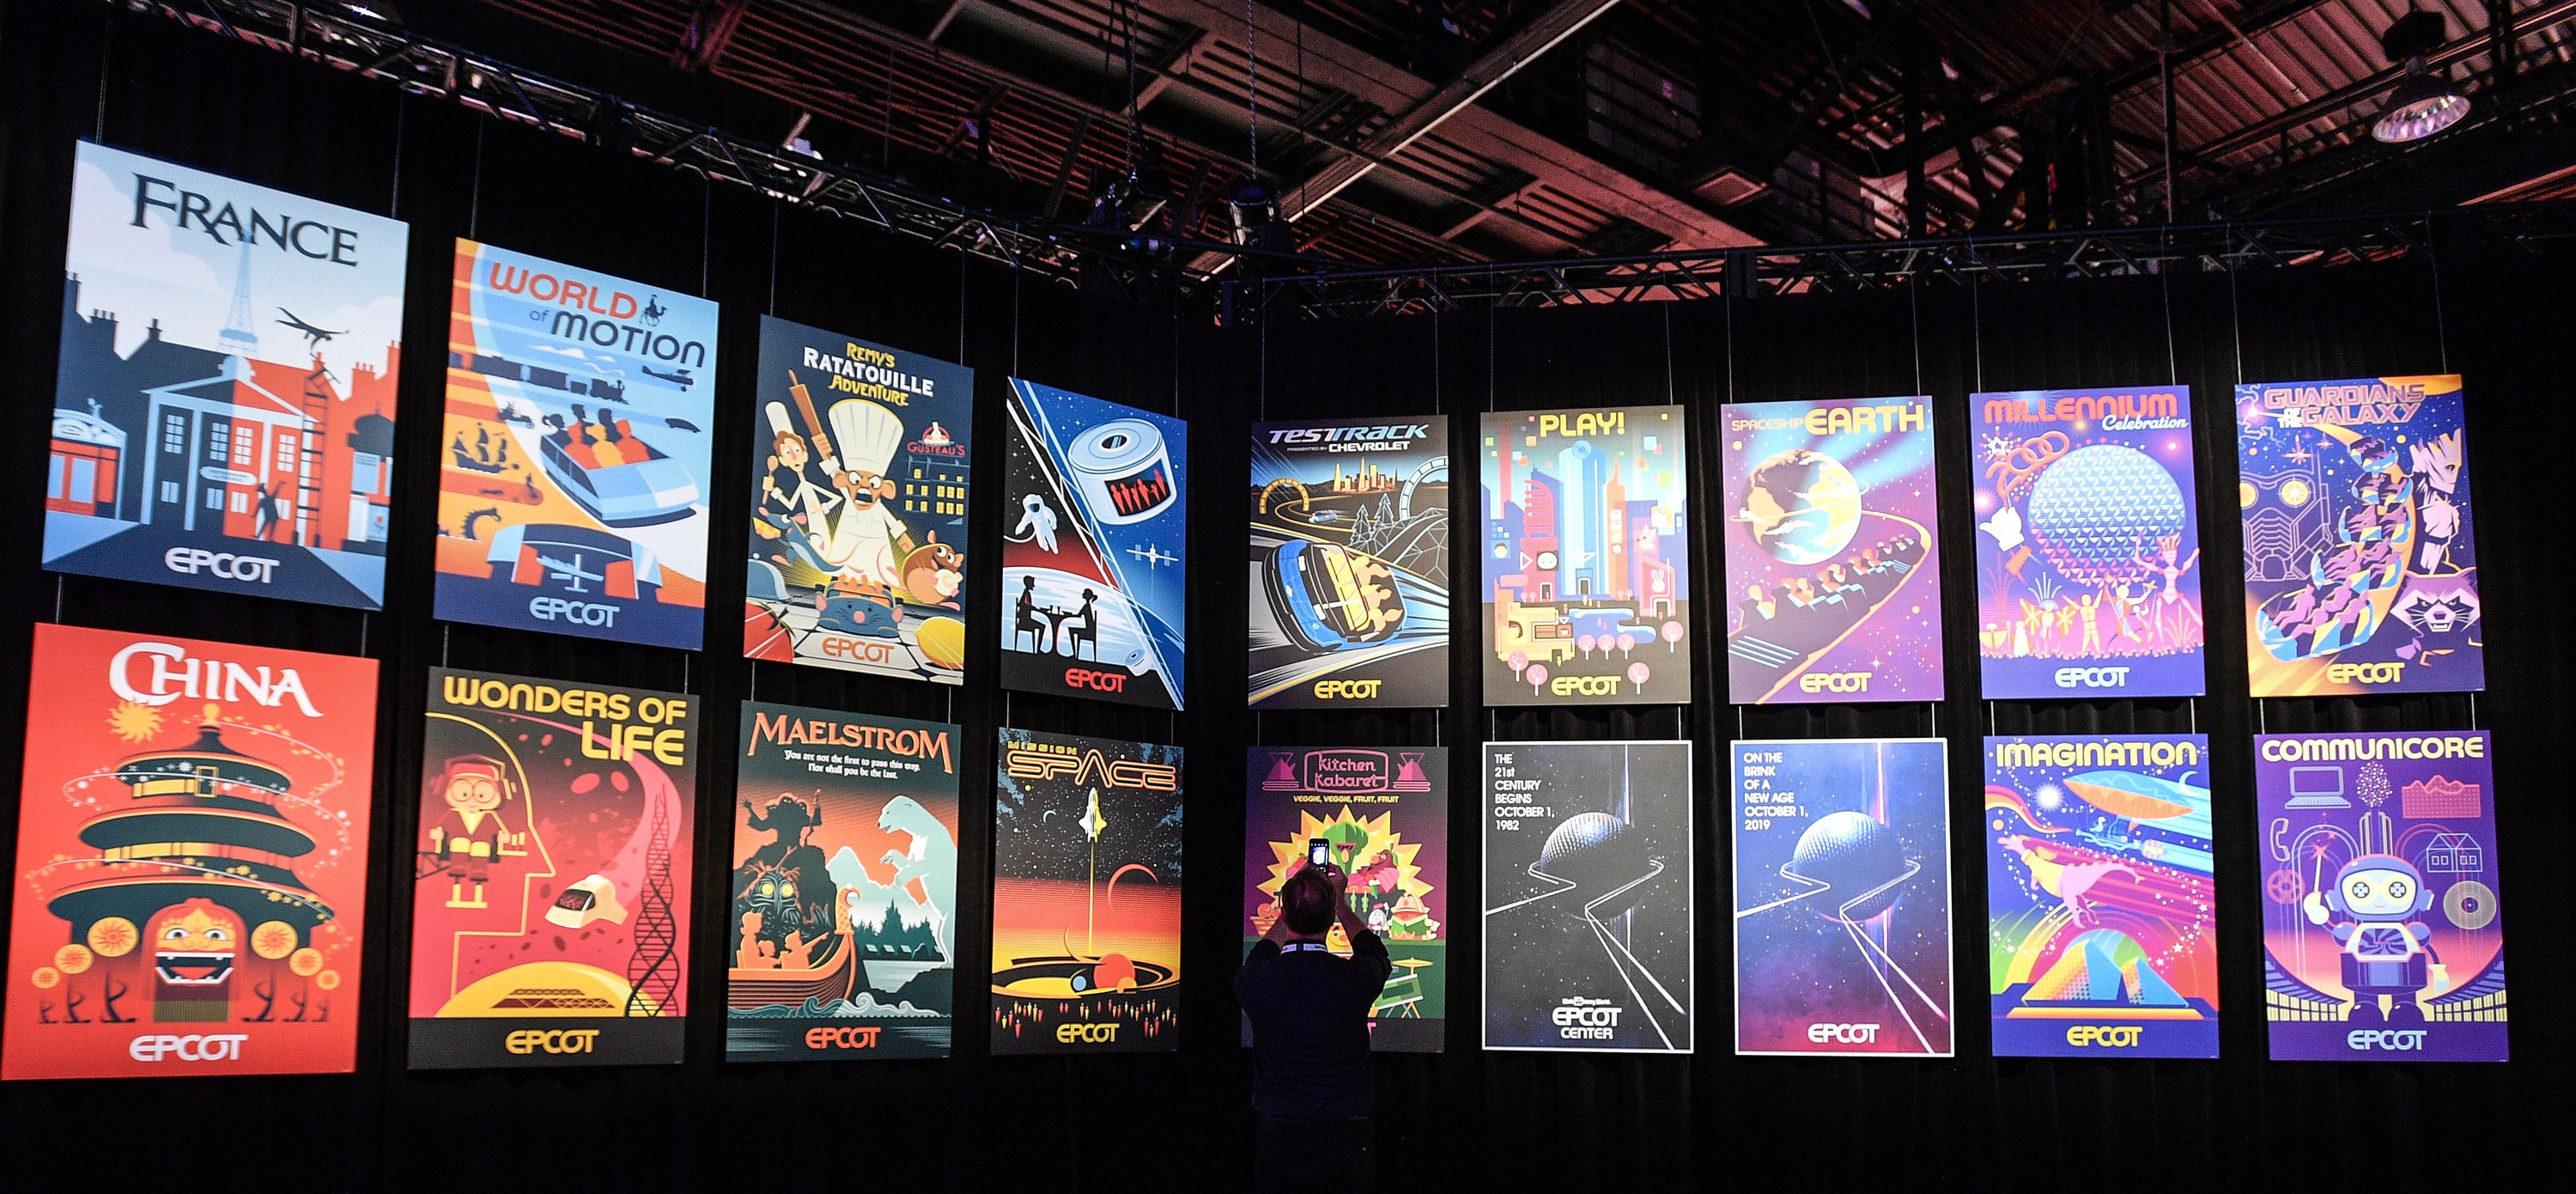 A visitor to the Epcot booth checks out retro-style posters during a media preview at the D23 Expo in 2019